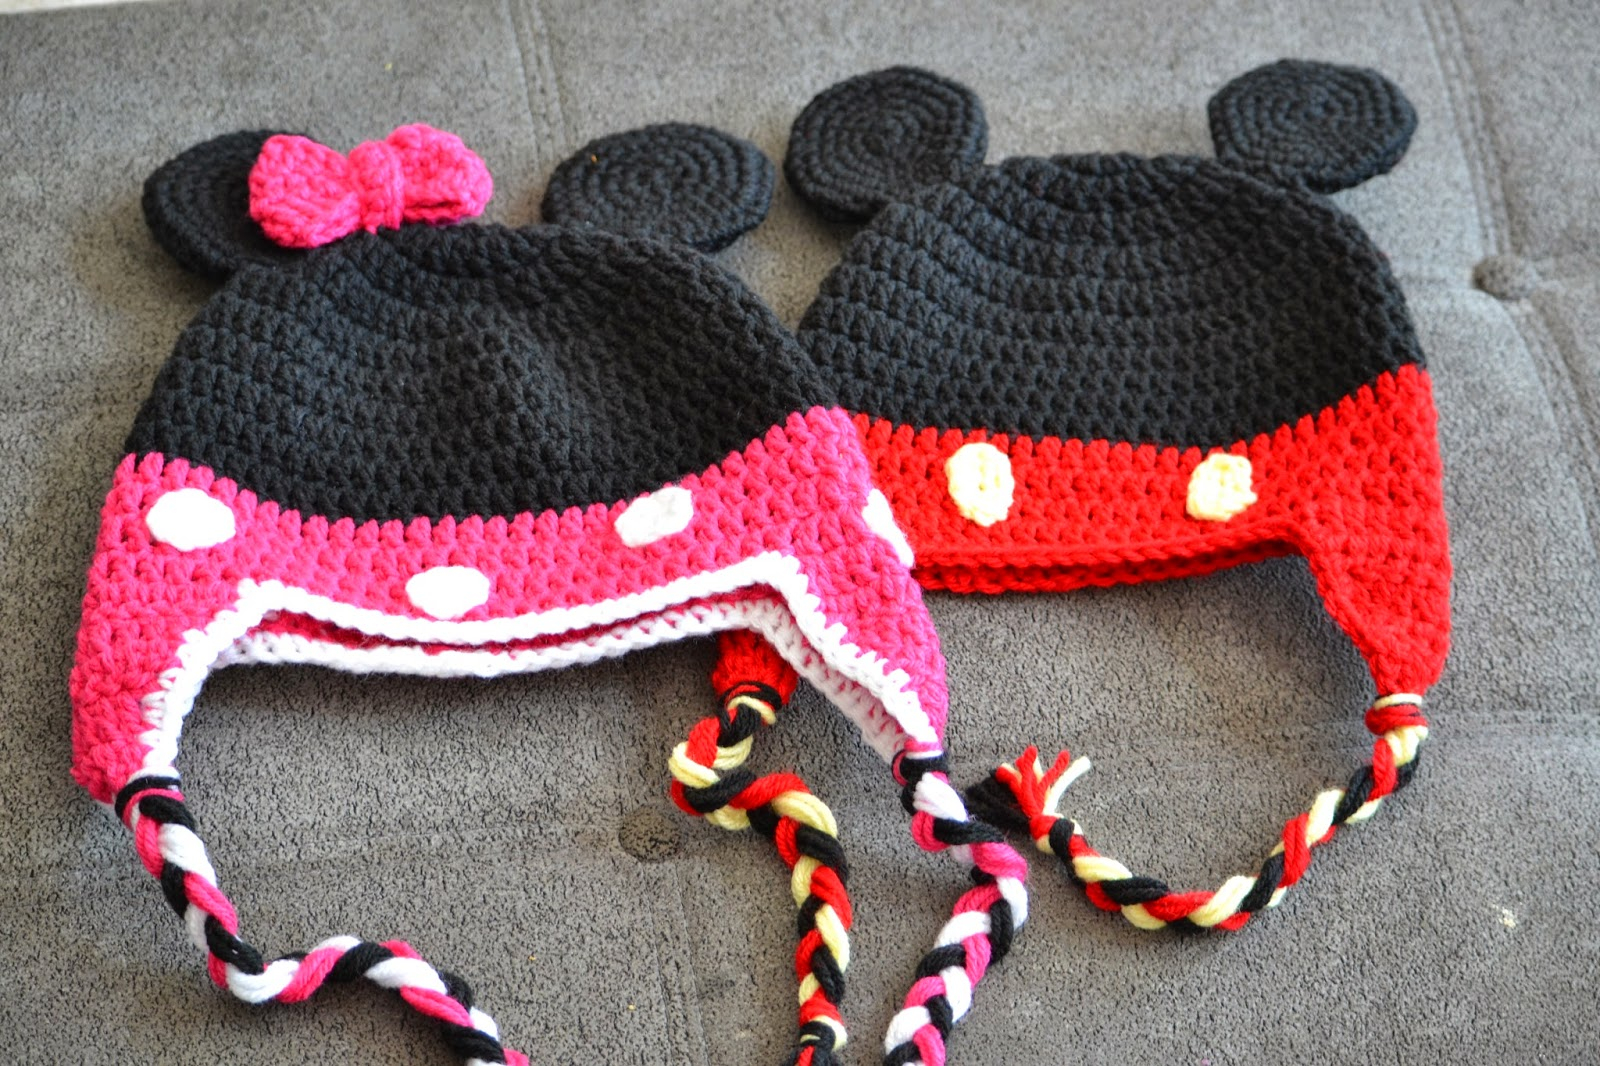 Knitting Pattern For Mickey Mouse Hat Knotty Knotty Crochet Minnie Little Mouse Hat Shoes And Skirt Set